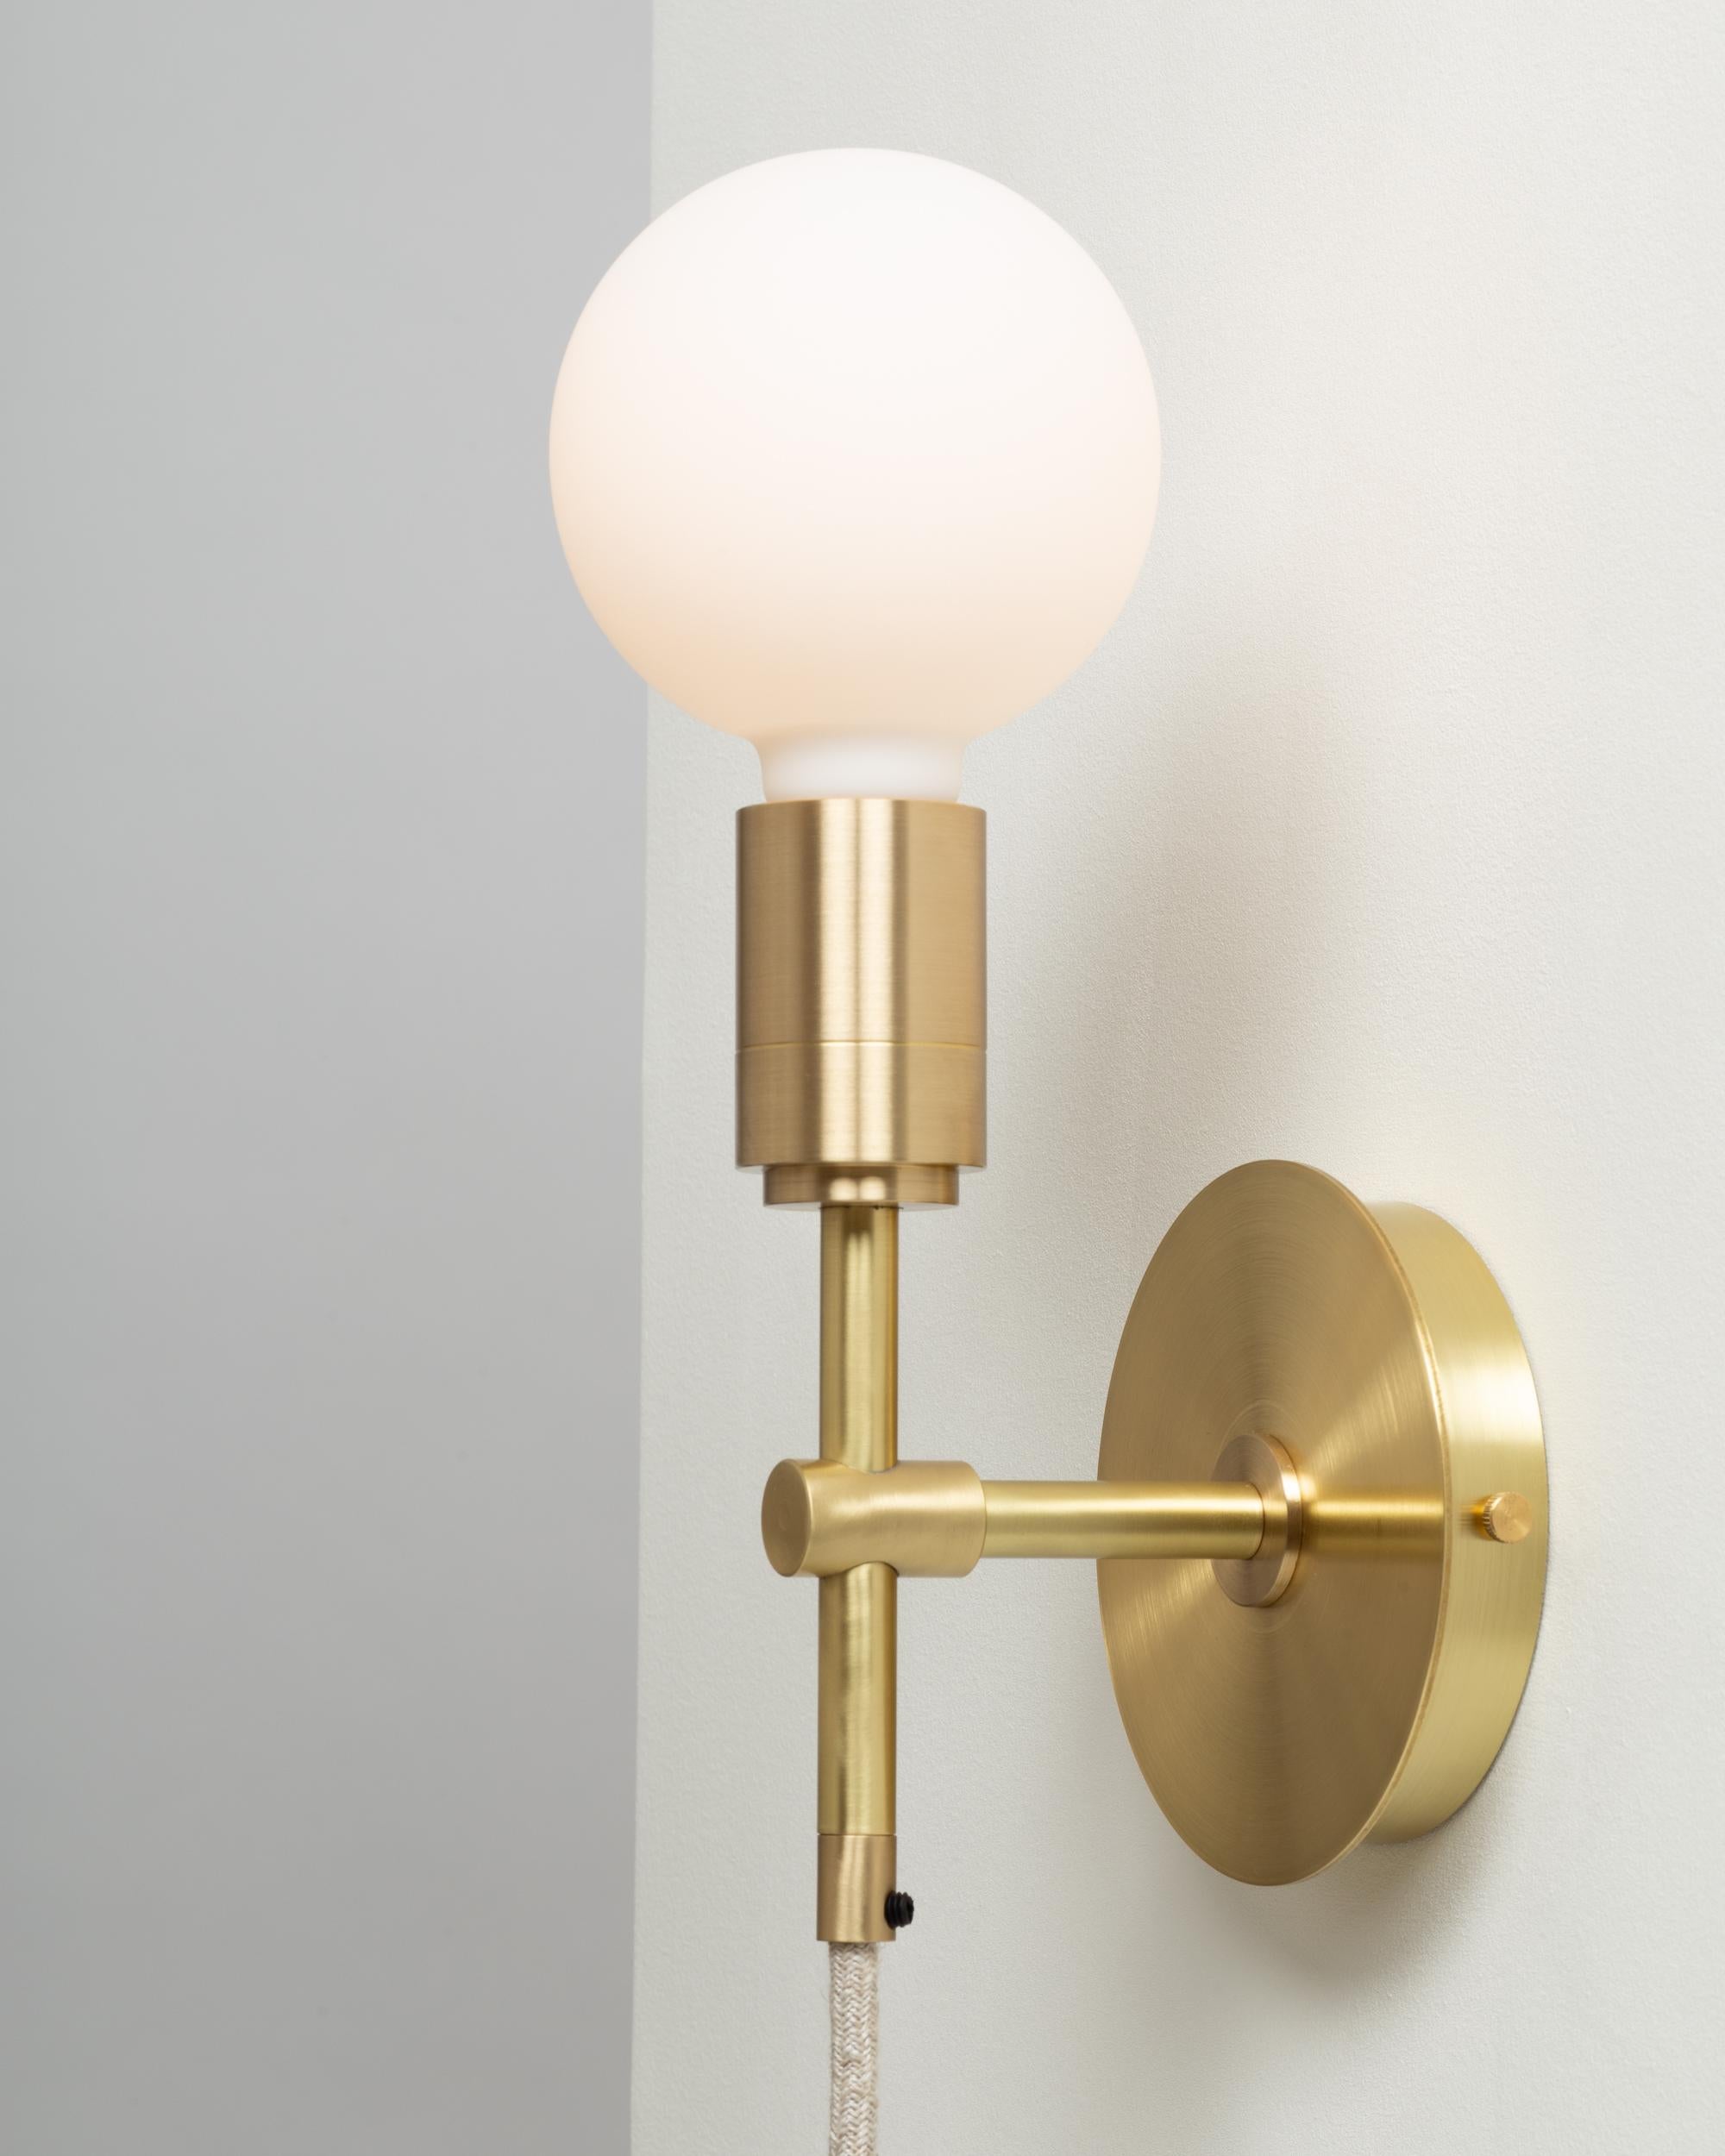 Hand-Crafted Sphere Stem Wall Mount Sconce Integrated Dimmer by Lights of London For Sale